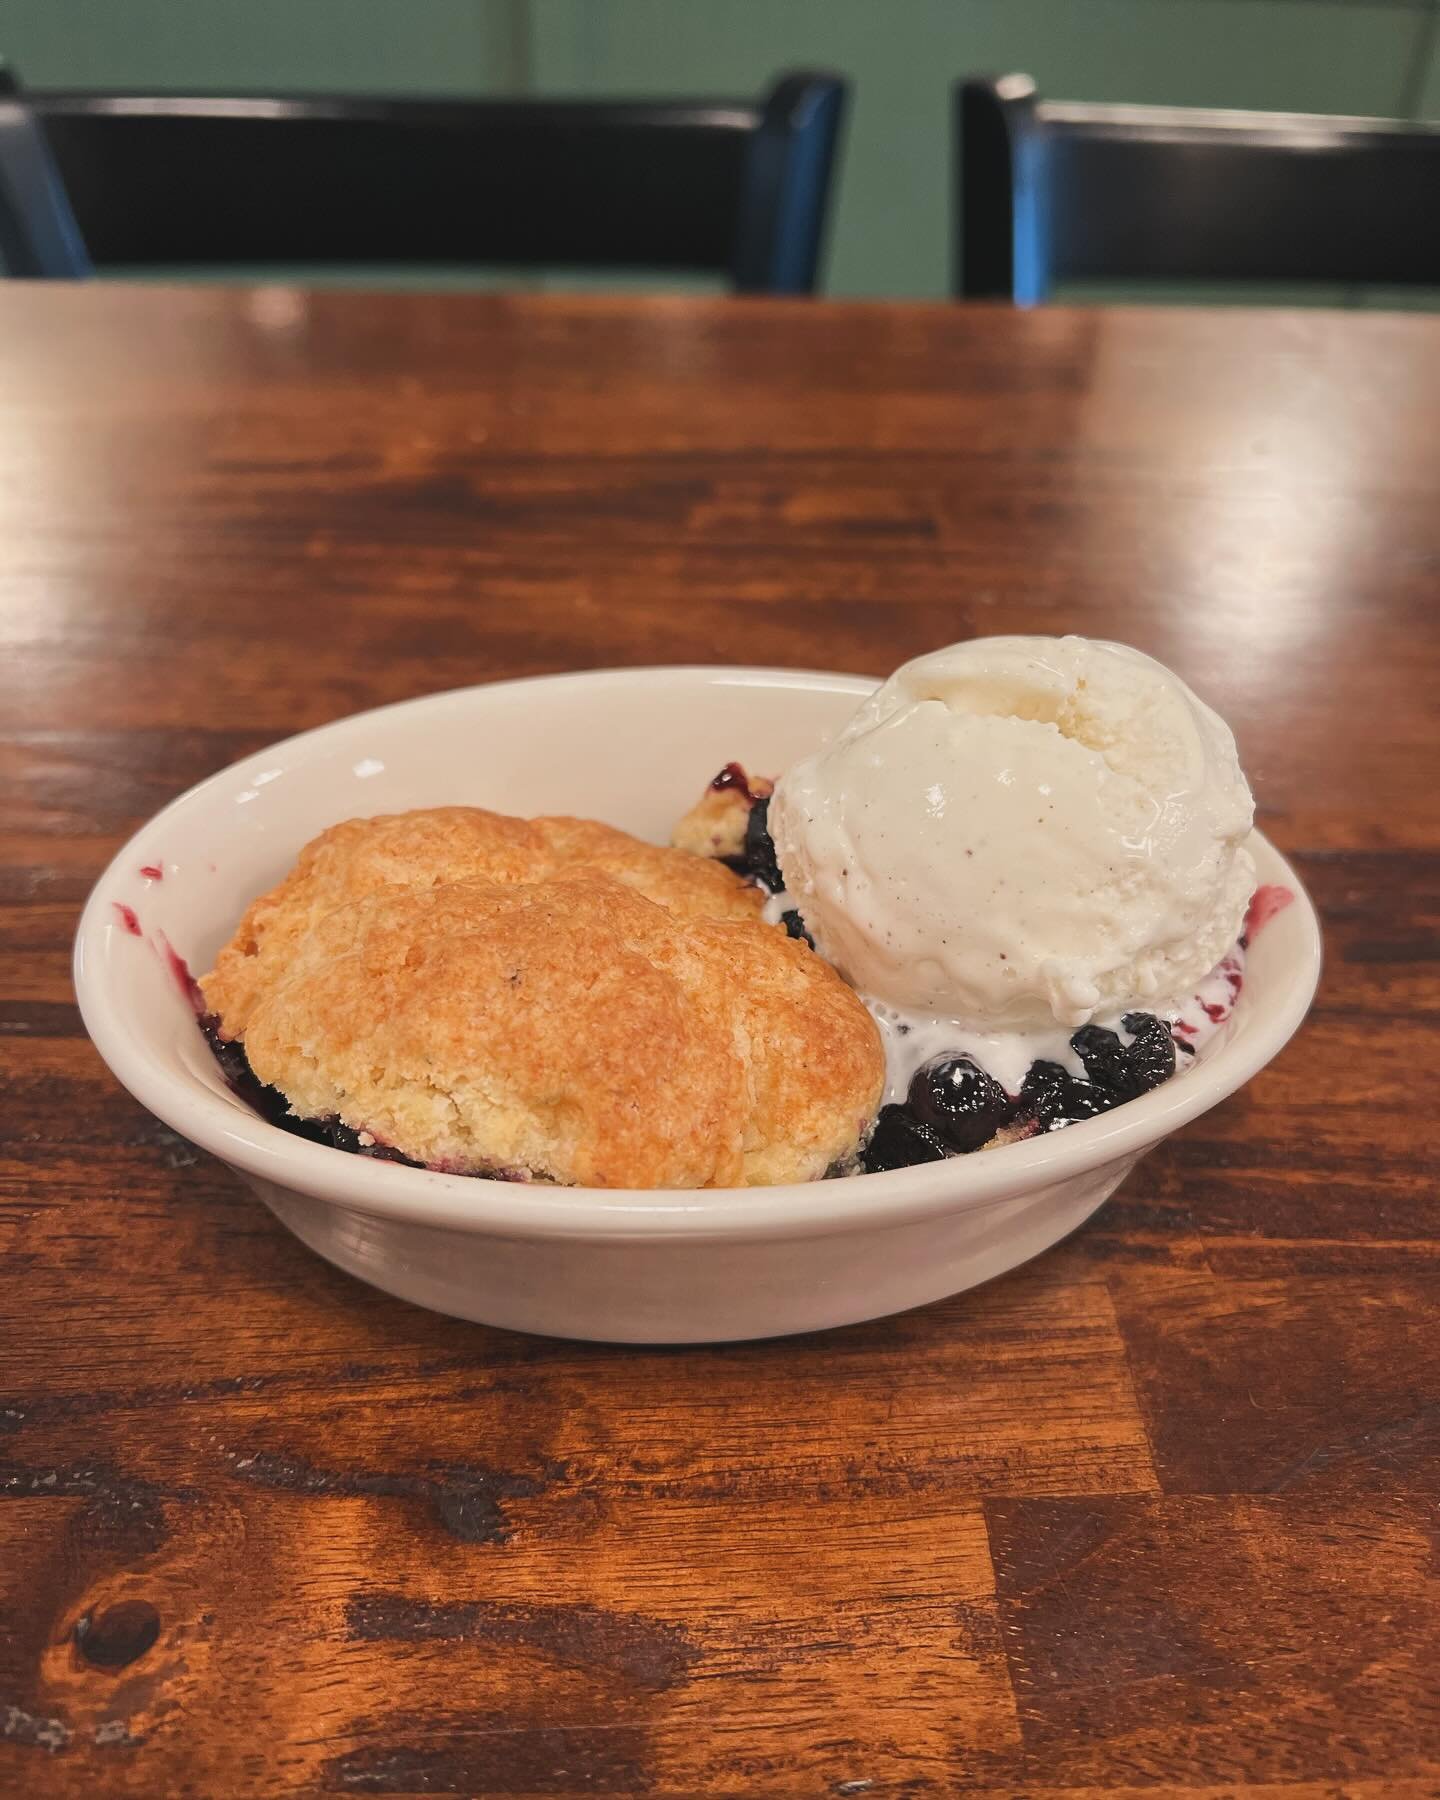 Specials this week are: Corn, Pepper, and Onion Fritters; Beer Battered Mushrooms; Beet and Arugula Tart with Ricotta Cheese; Springtime Soup (it&rsquo;s green!); Blueberry Cobbler (pictured with ice cream added). Come down this weekend for something